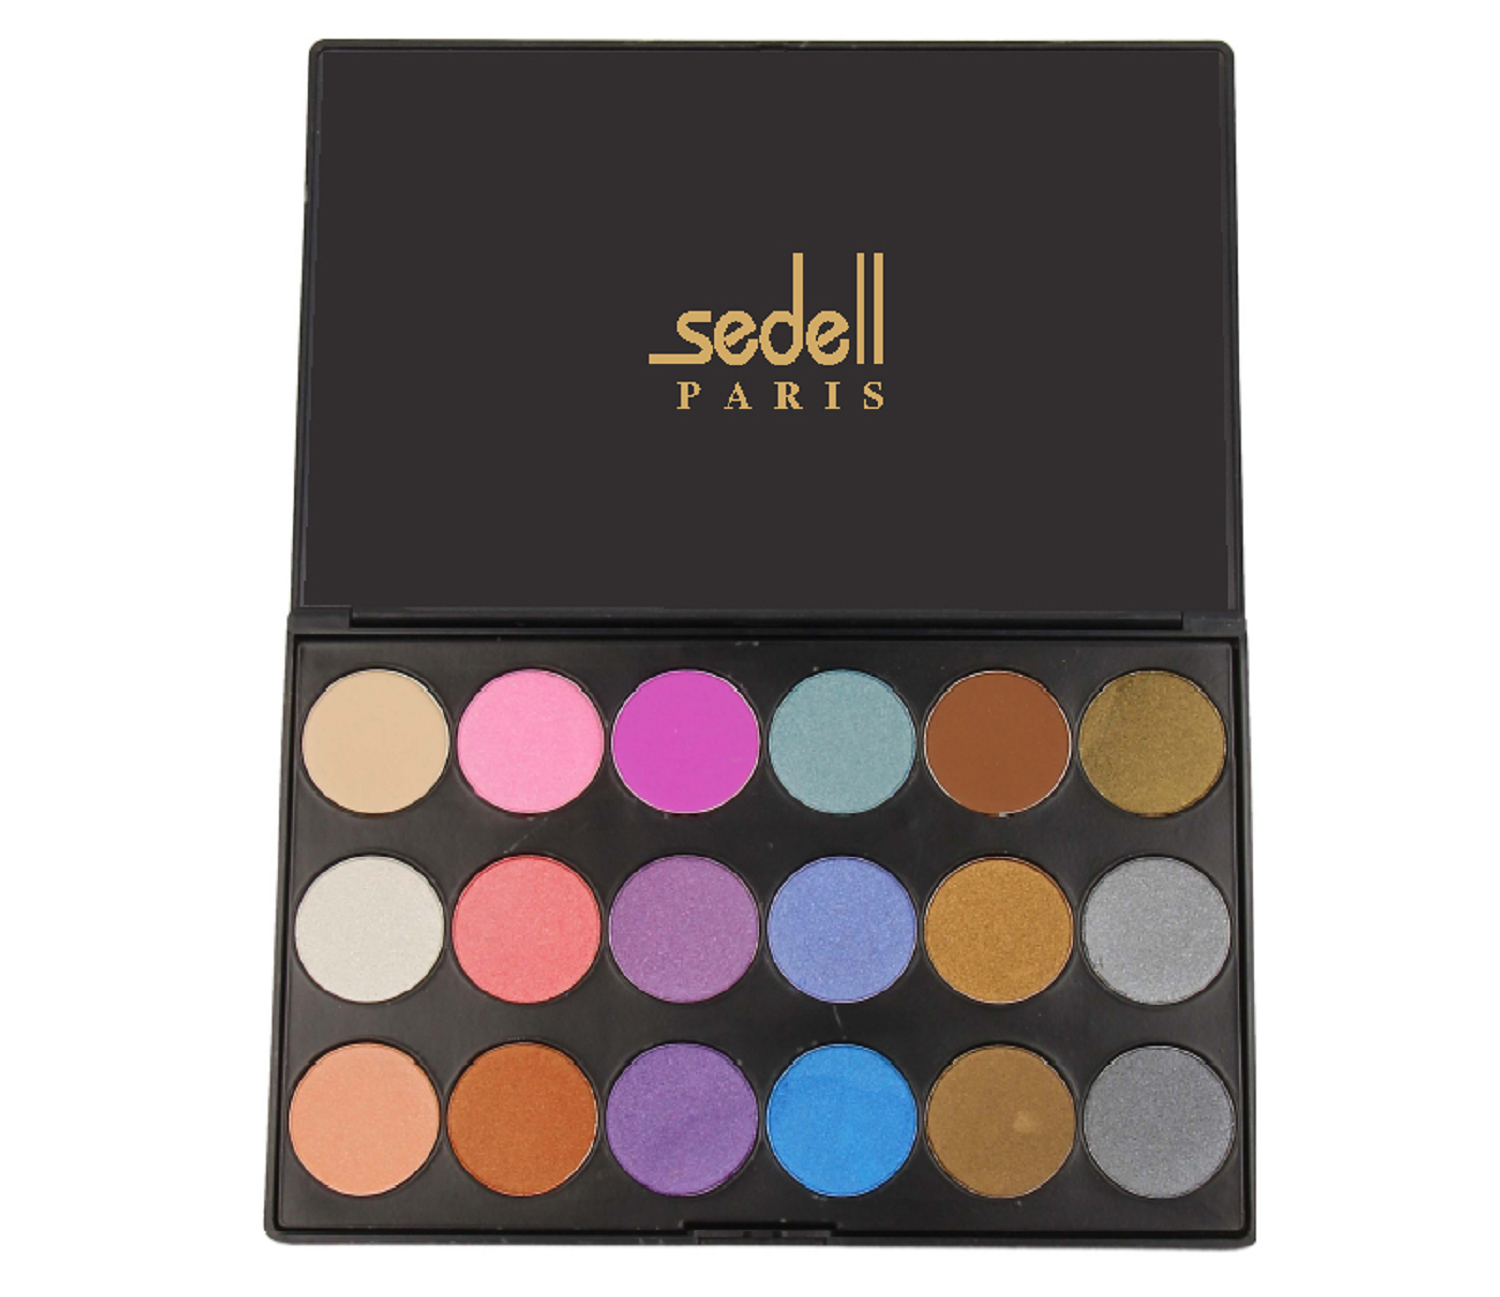 Sedell Professional Waterproof Eye Shadow Powder Make Up Palette Shimmers Mattes Contour Glow Kit Set of 18 Colors